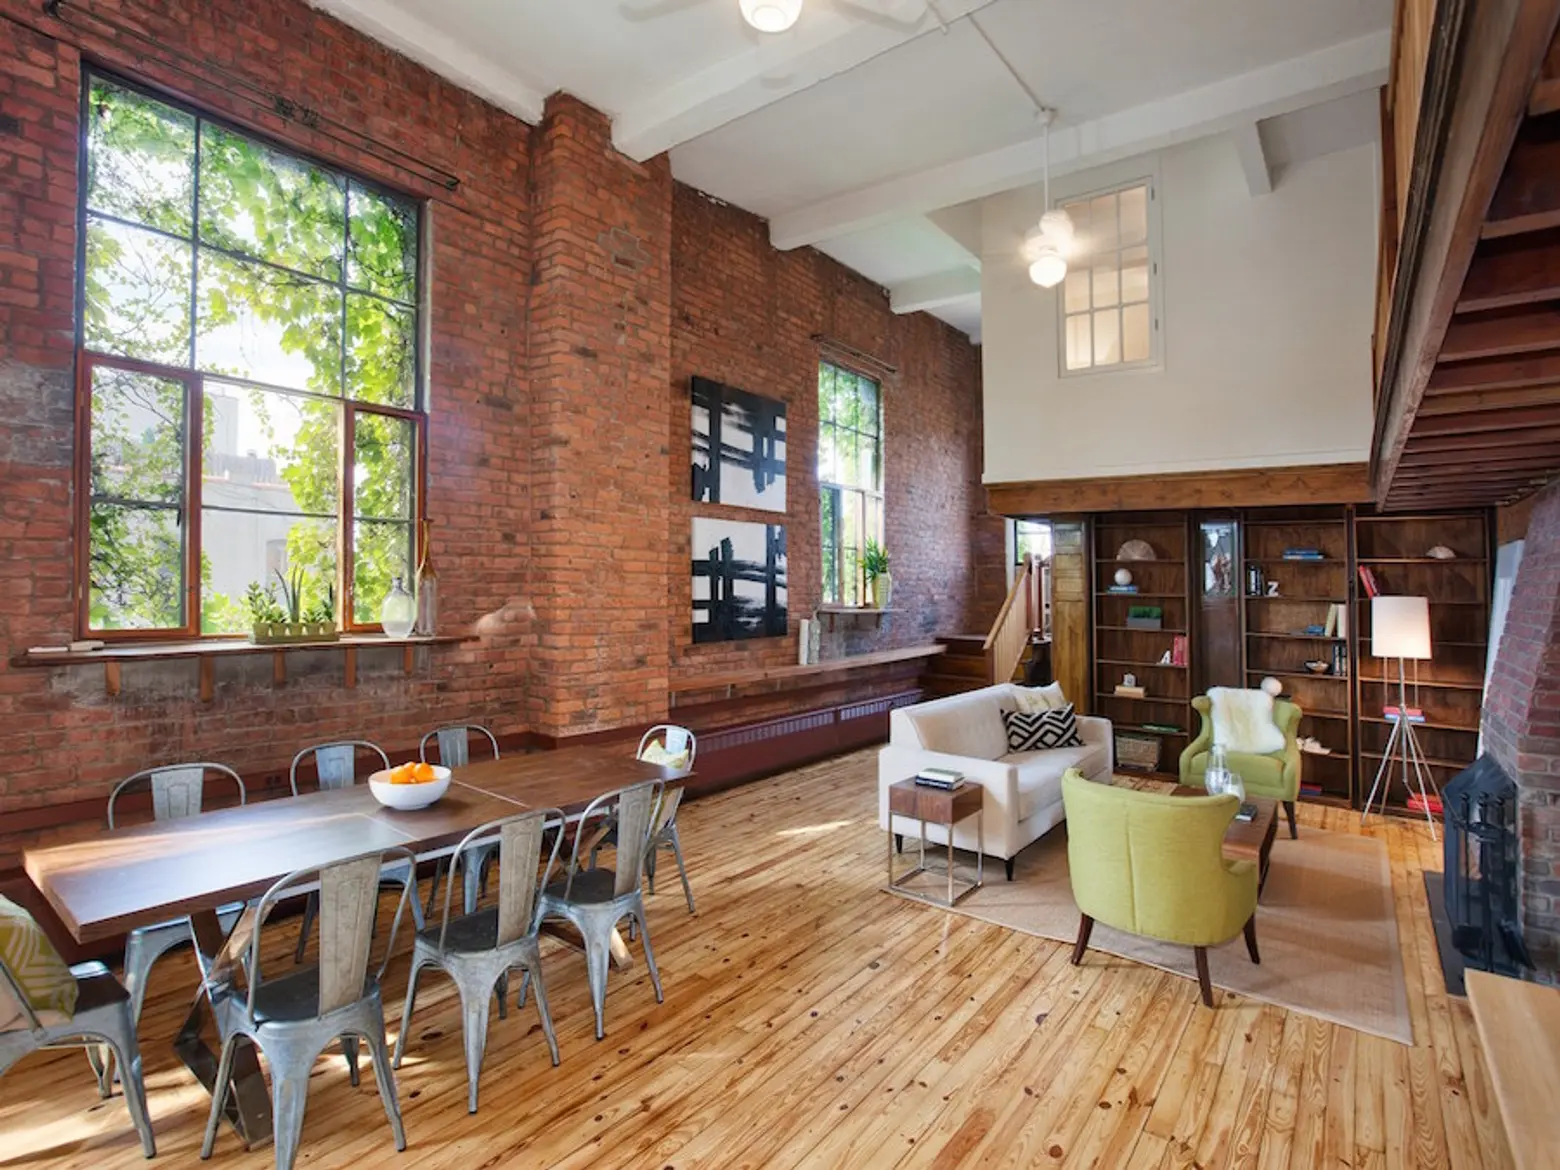 459 12th Street, Cool Listing, Park Slope, South Slope, Loft, Co-op, Brooklyn Loft for Sale, Brooklyn Apartment for Sale, NYC Real Estate,